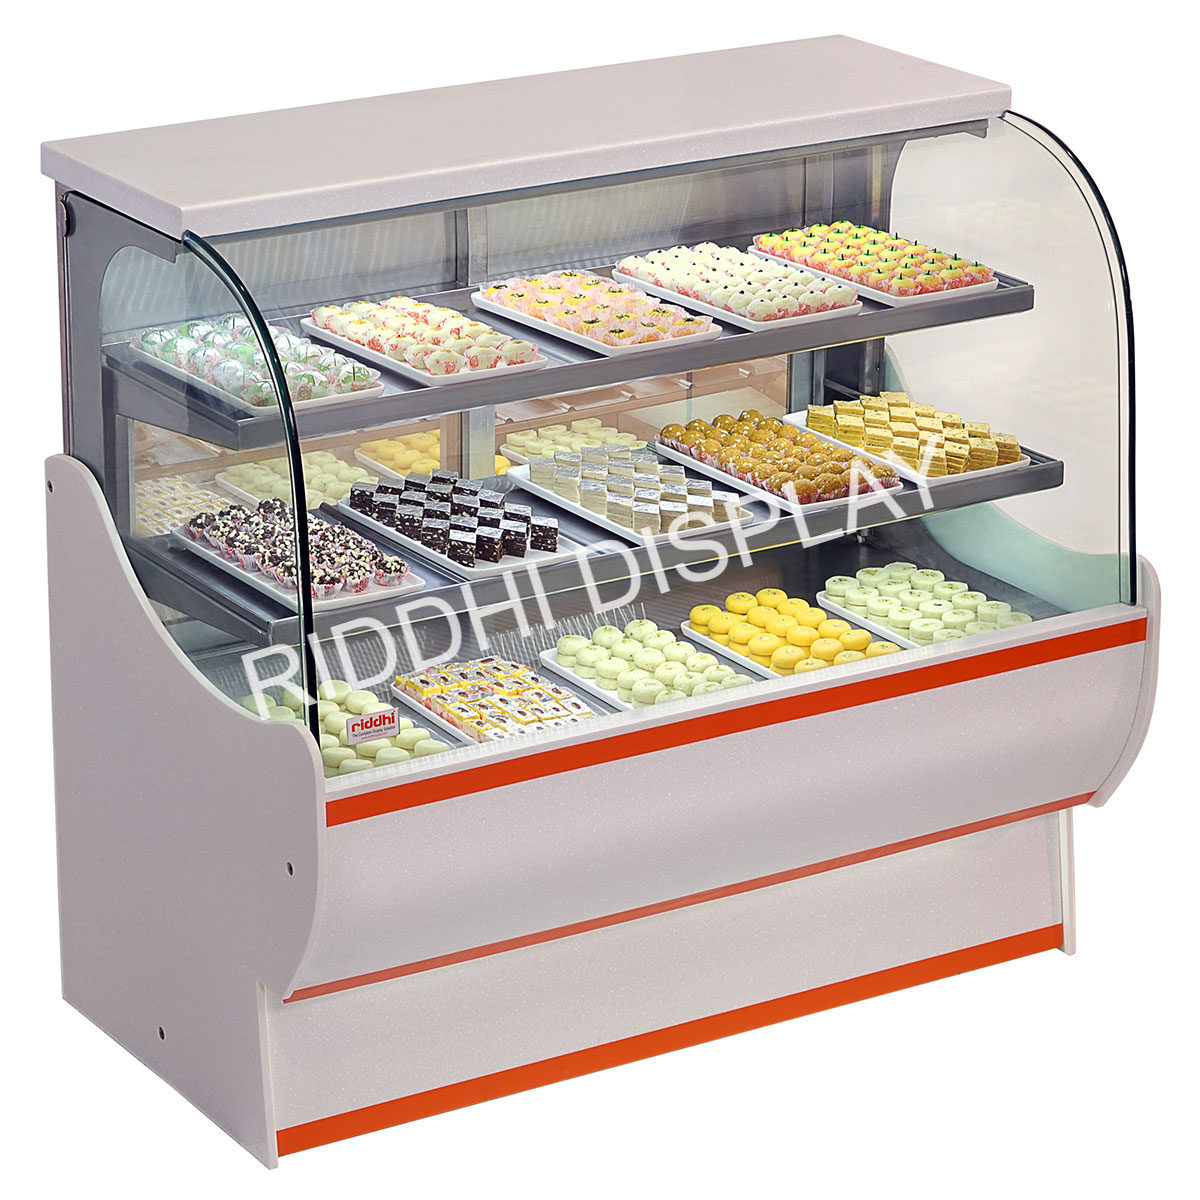 Bakery Smart is a self-service display for bakery products with blind sides